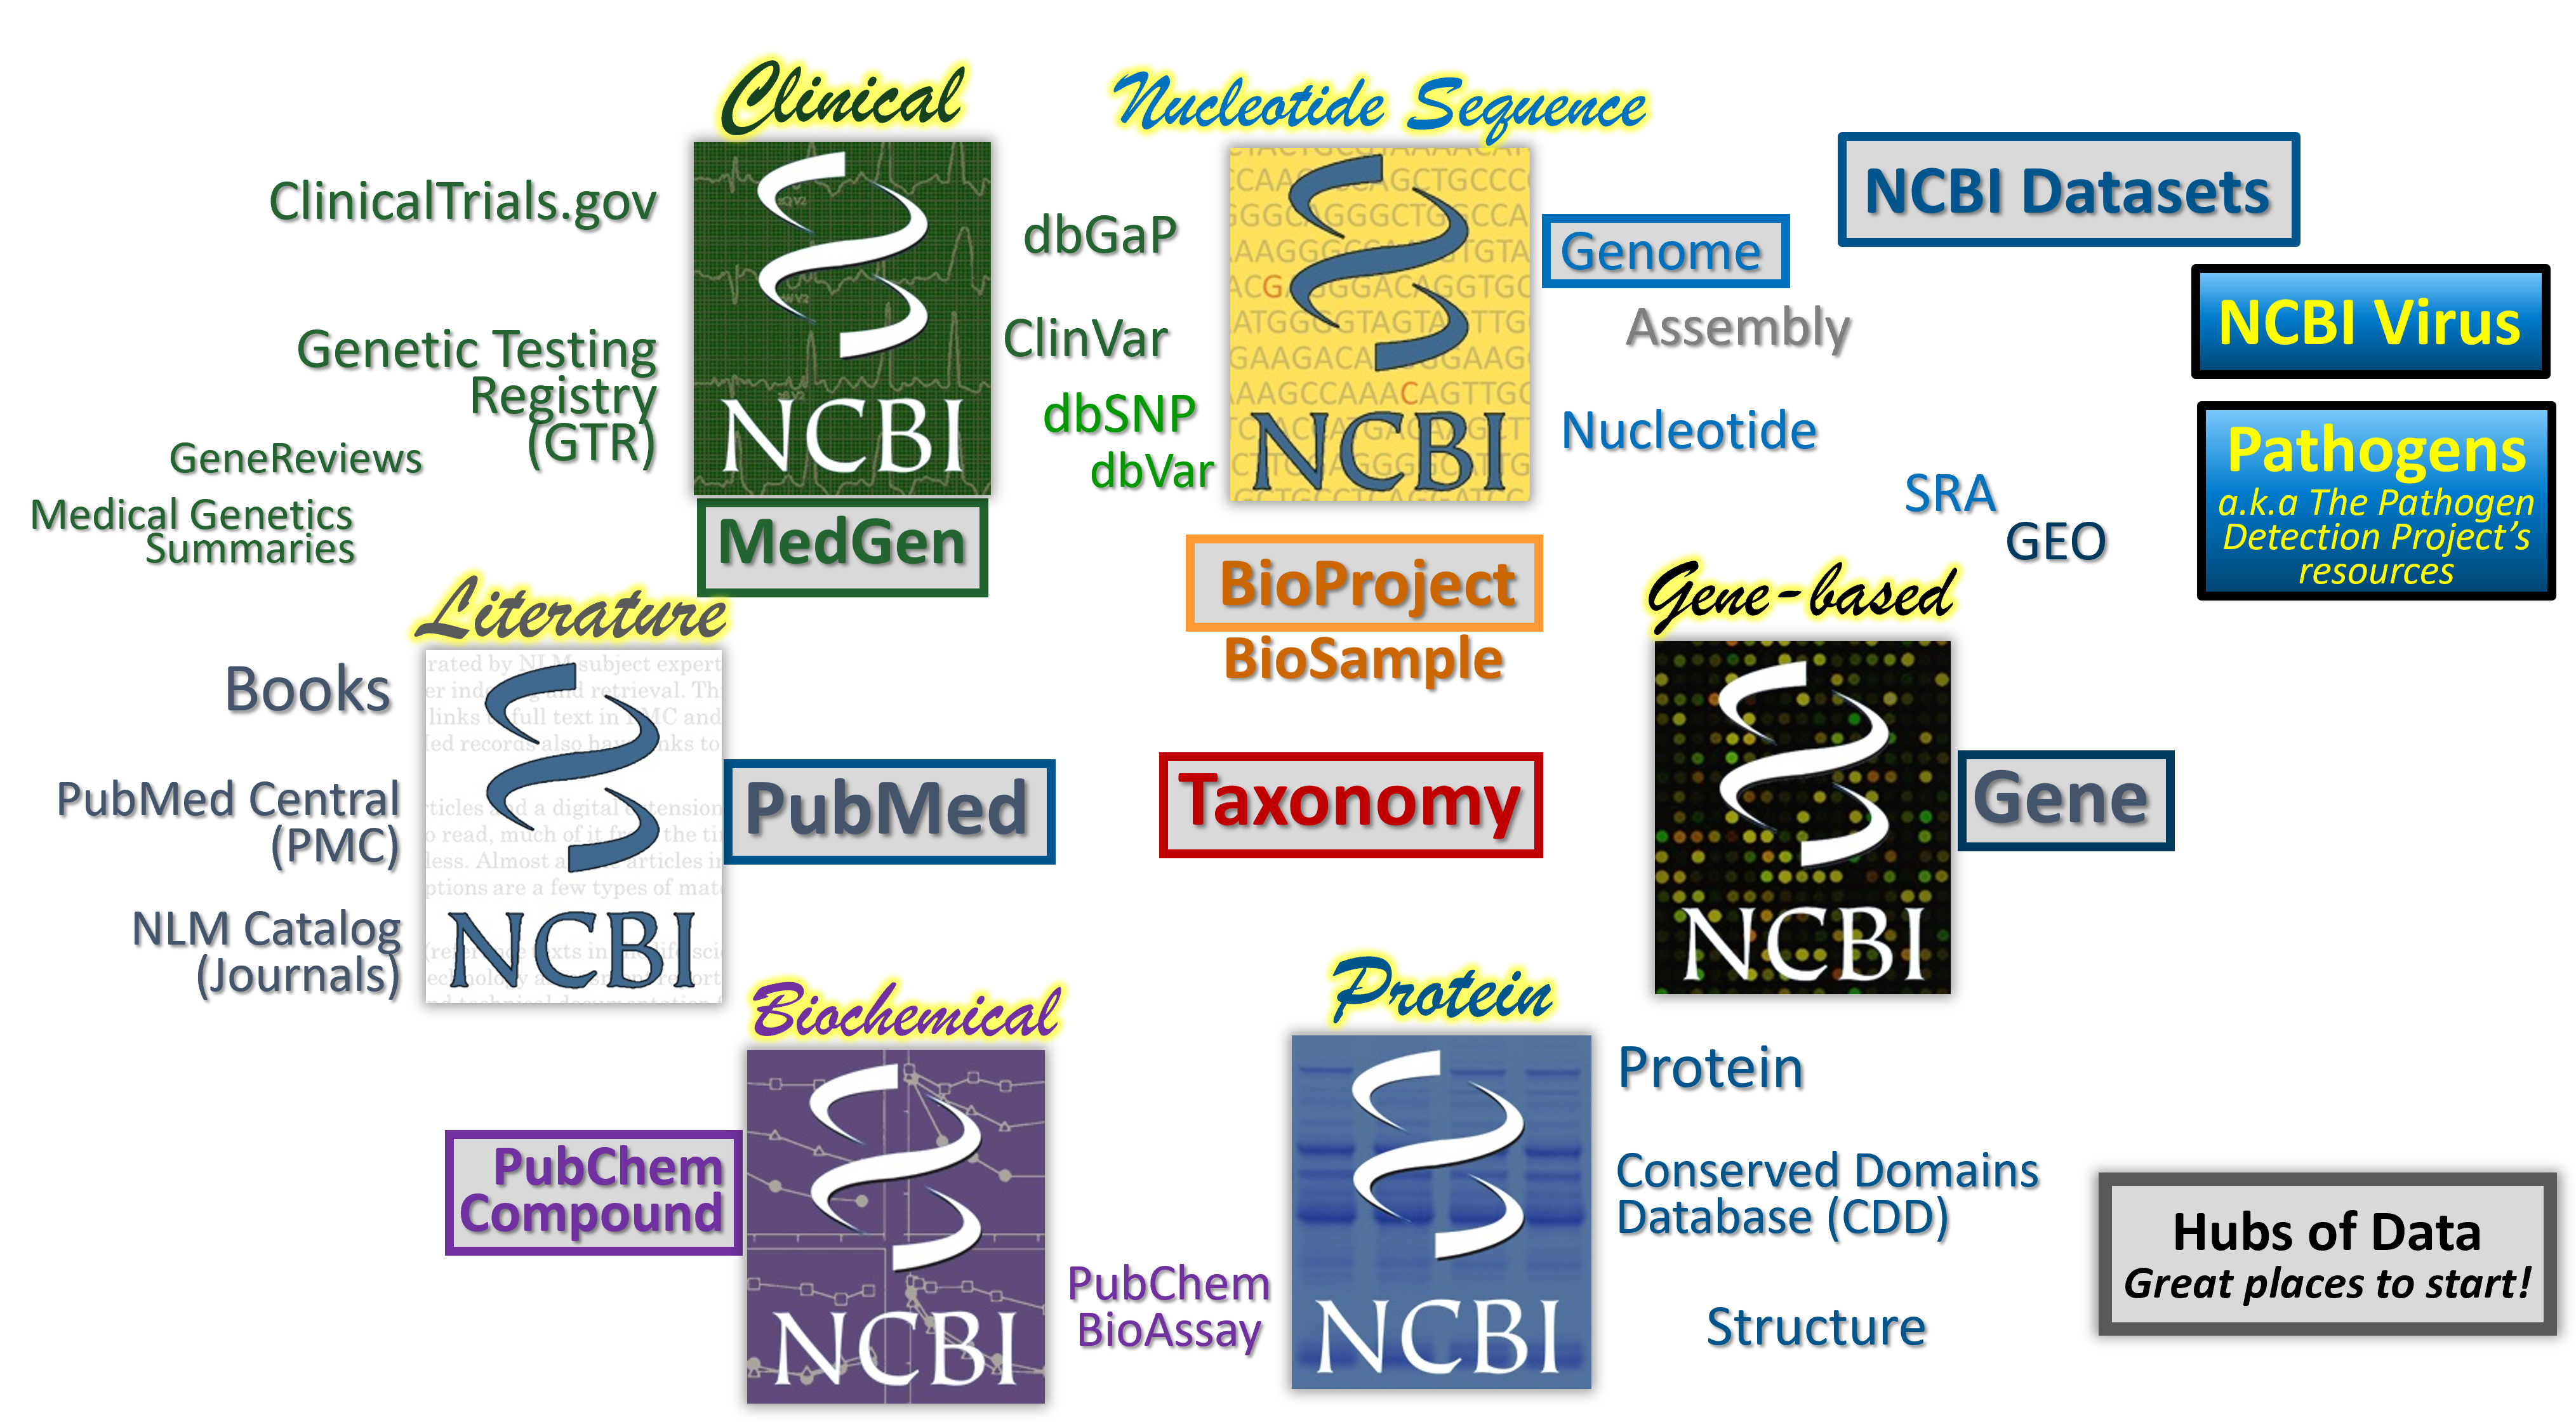 A graphic with key NCBI databases with some topic hubs indicated